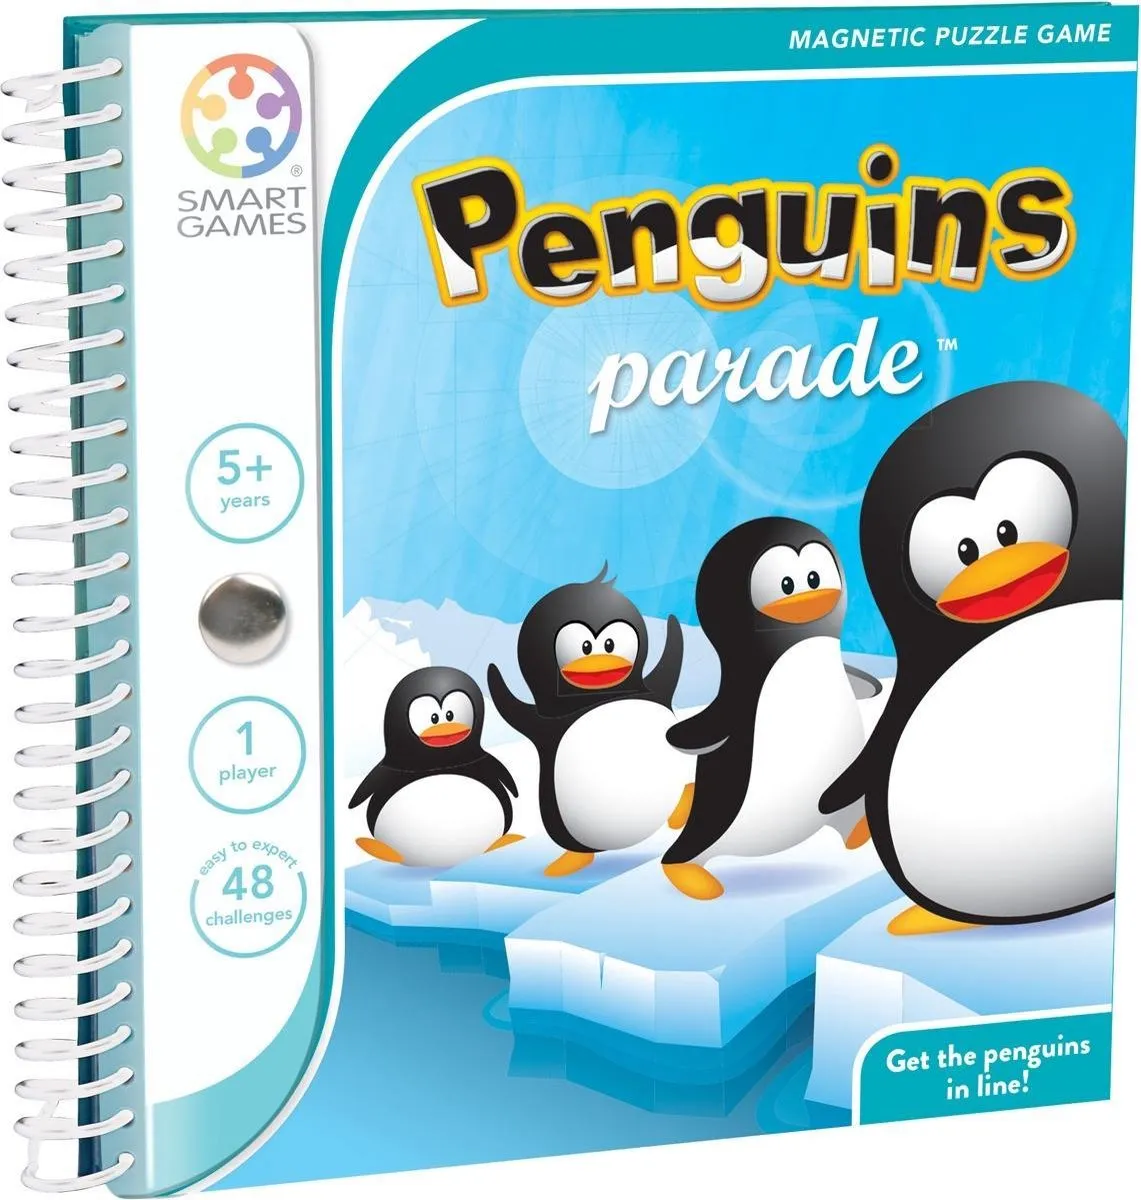 Magnetic Travel Games - Penguins Parade speelgoed